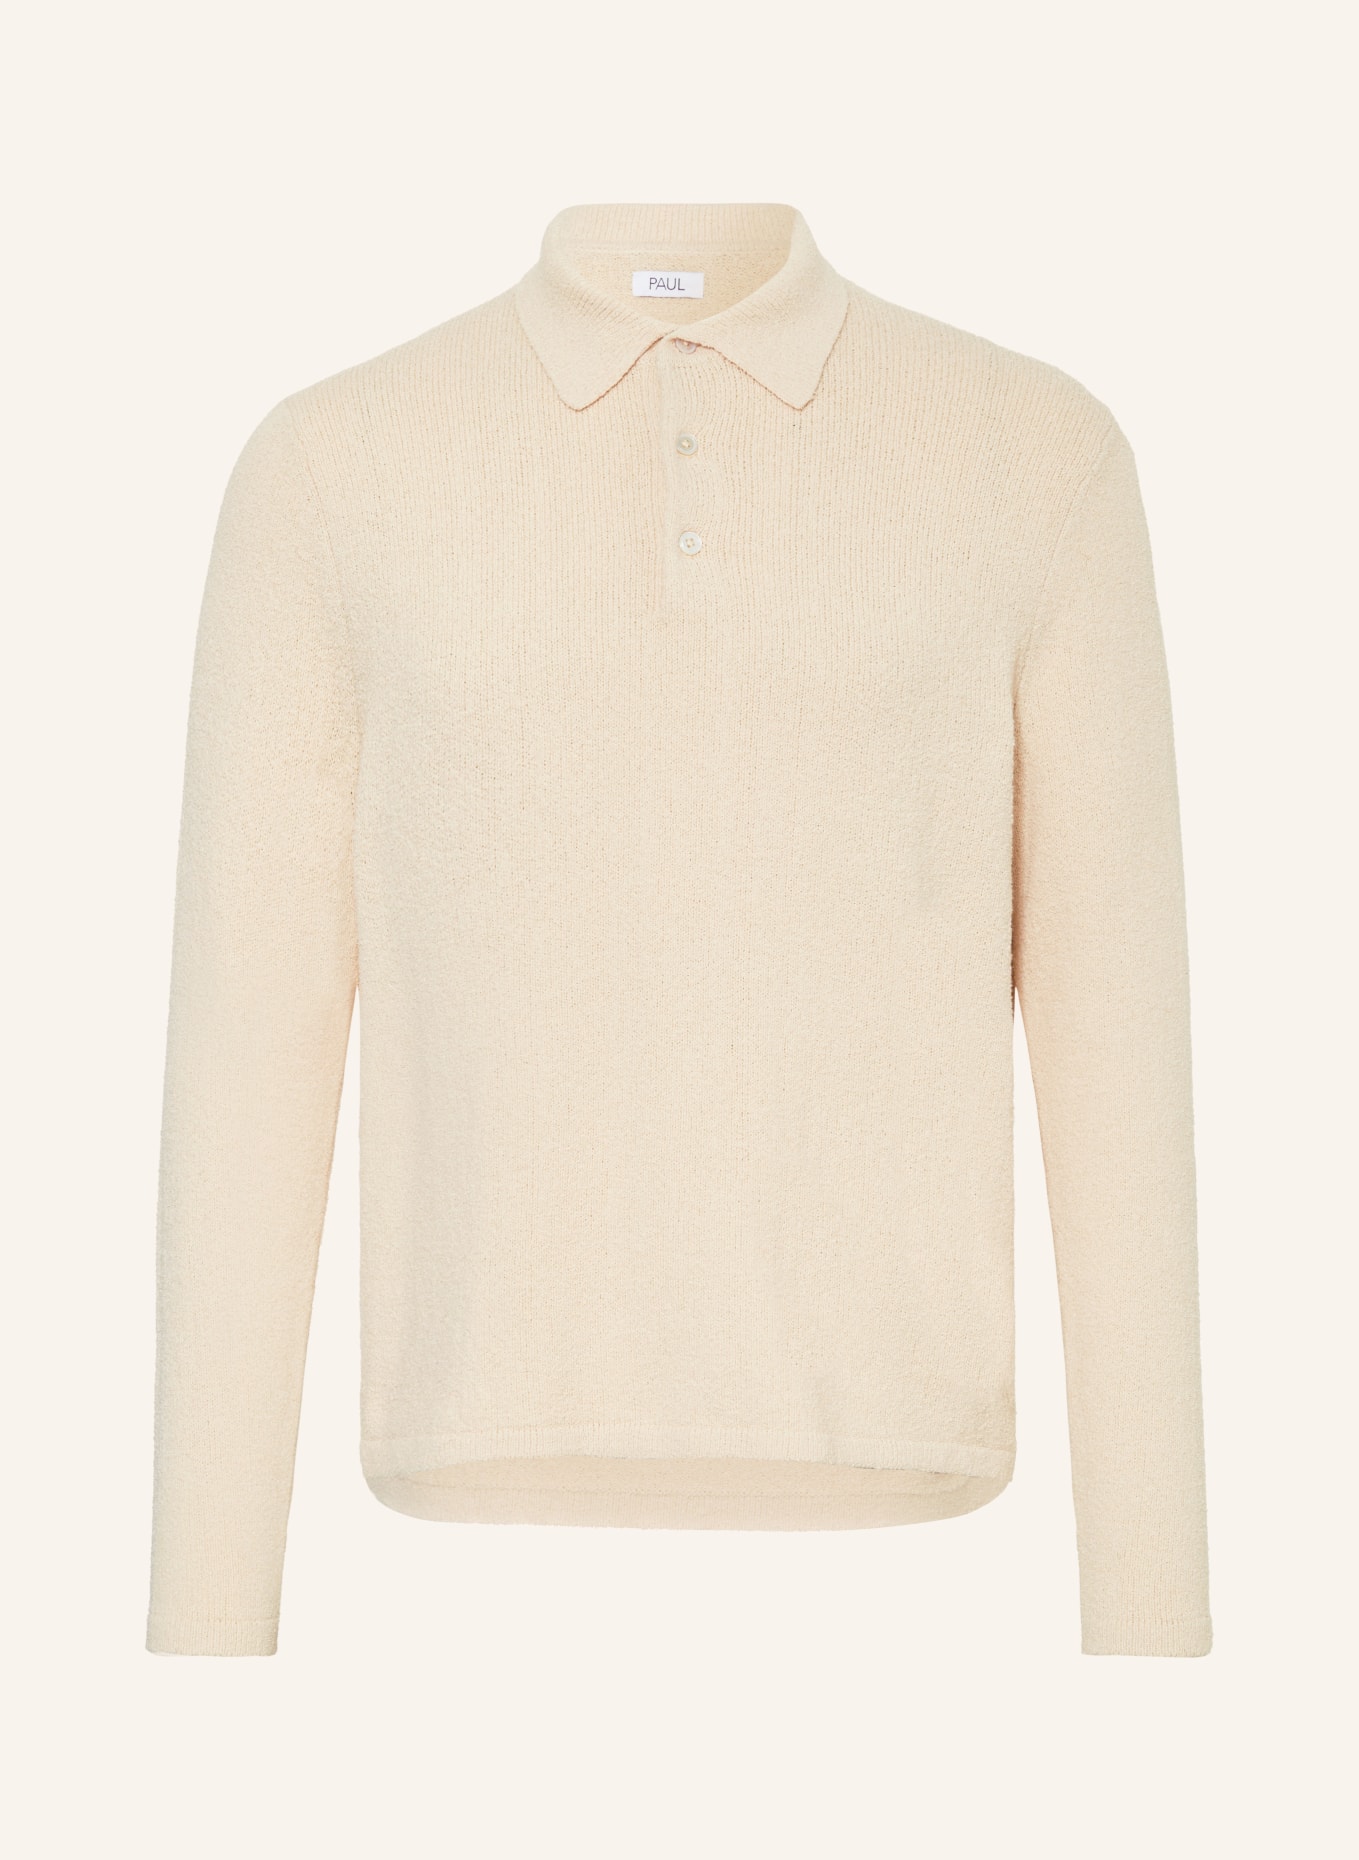 PAUL Knitted polo shirt, Color: BEIGE (Image 1)